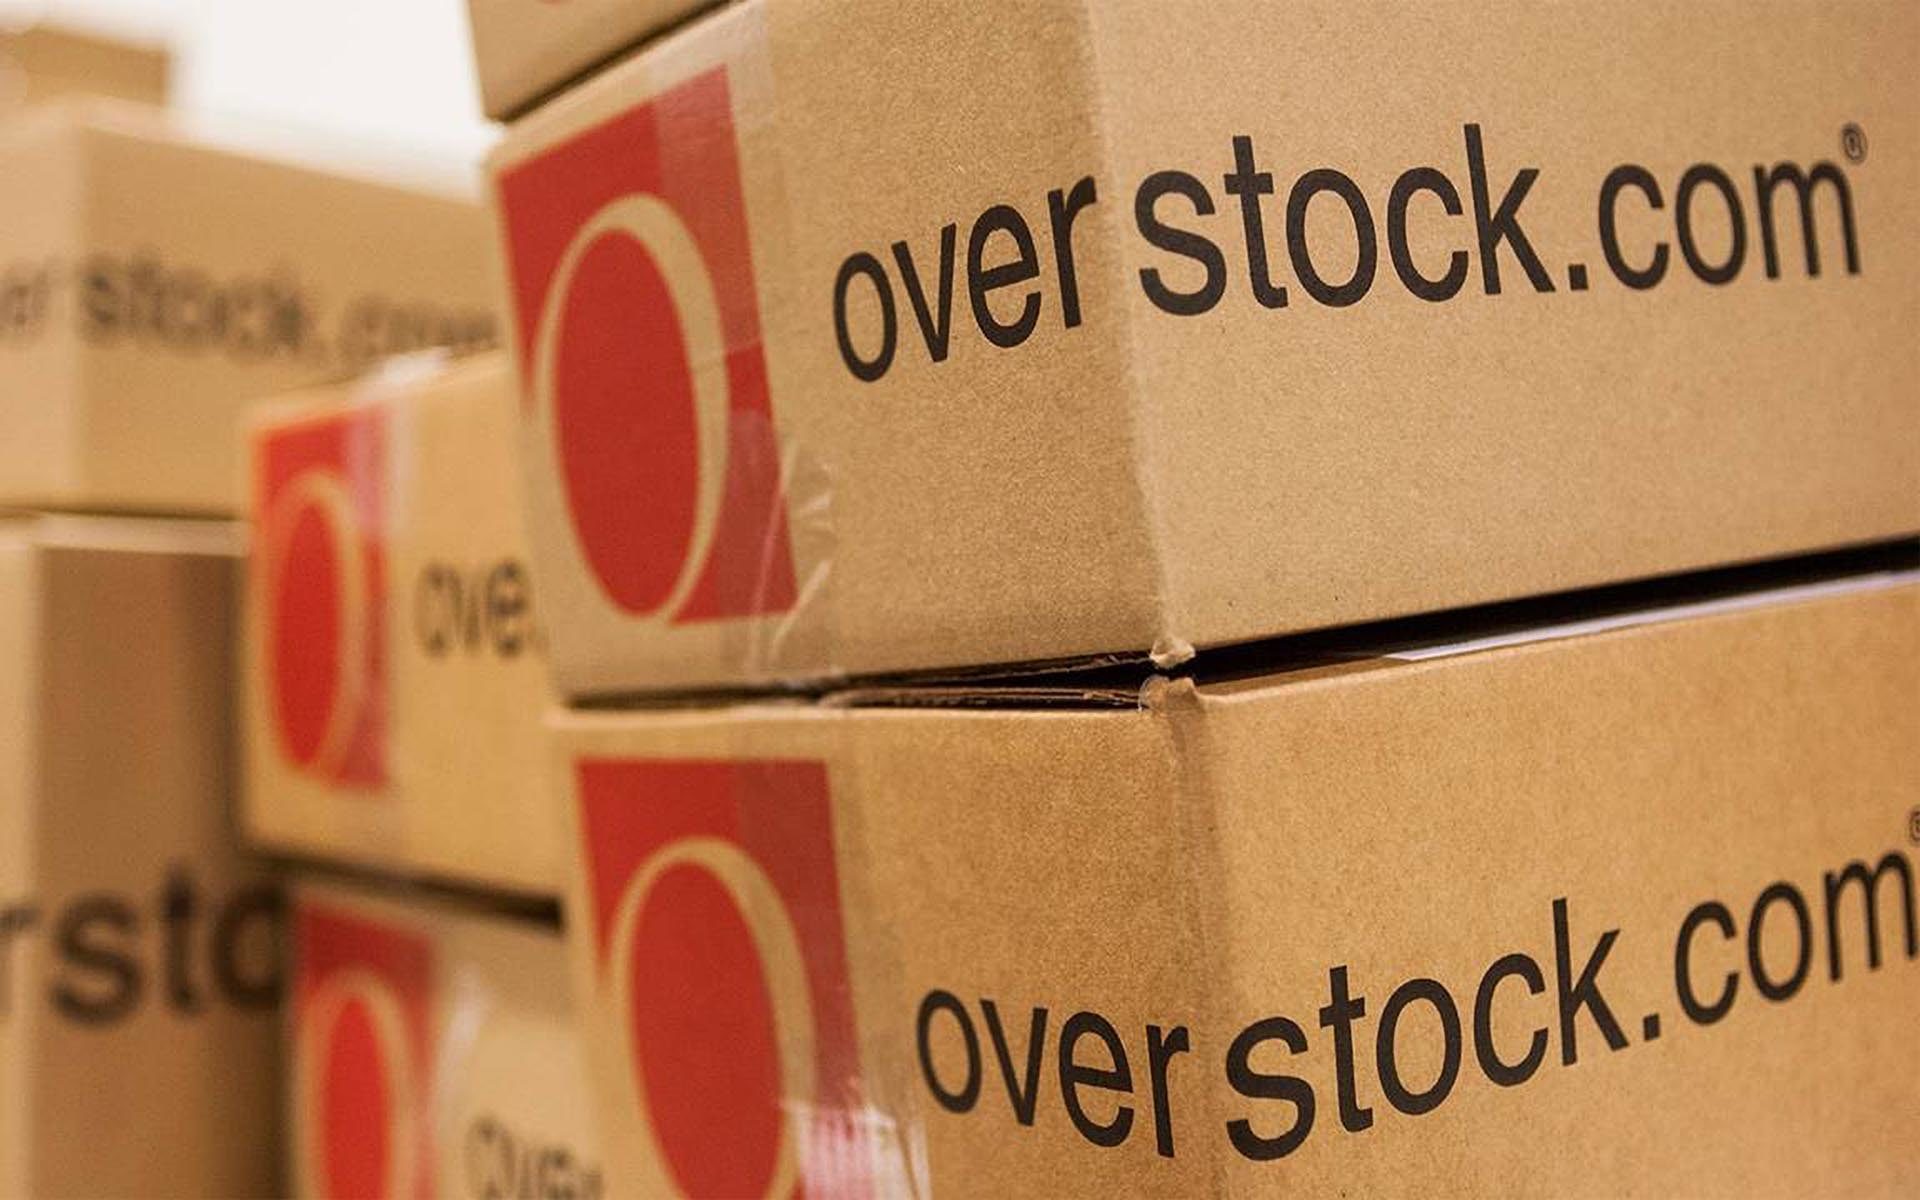 patrick byrne departs but Overstock long on crypto